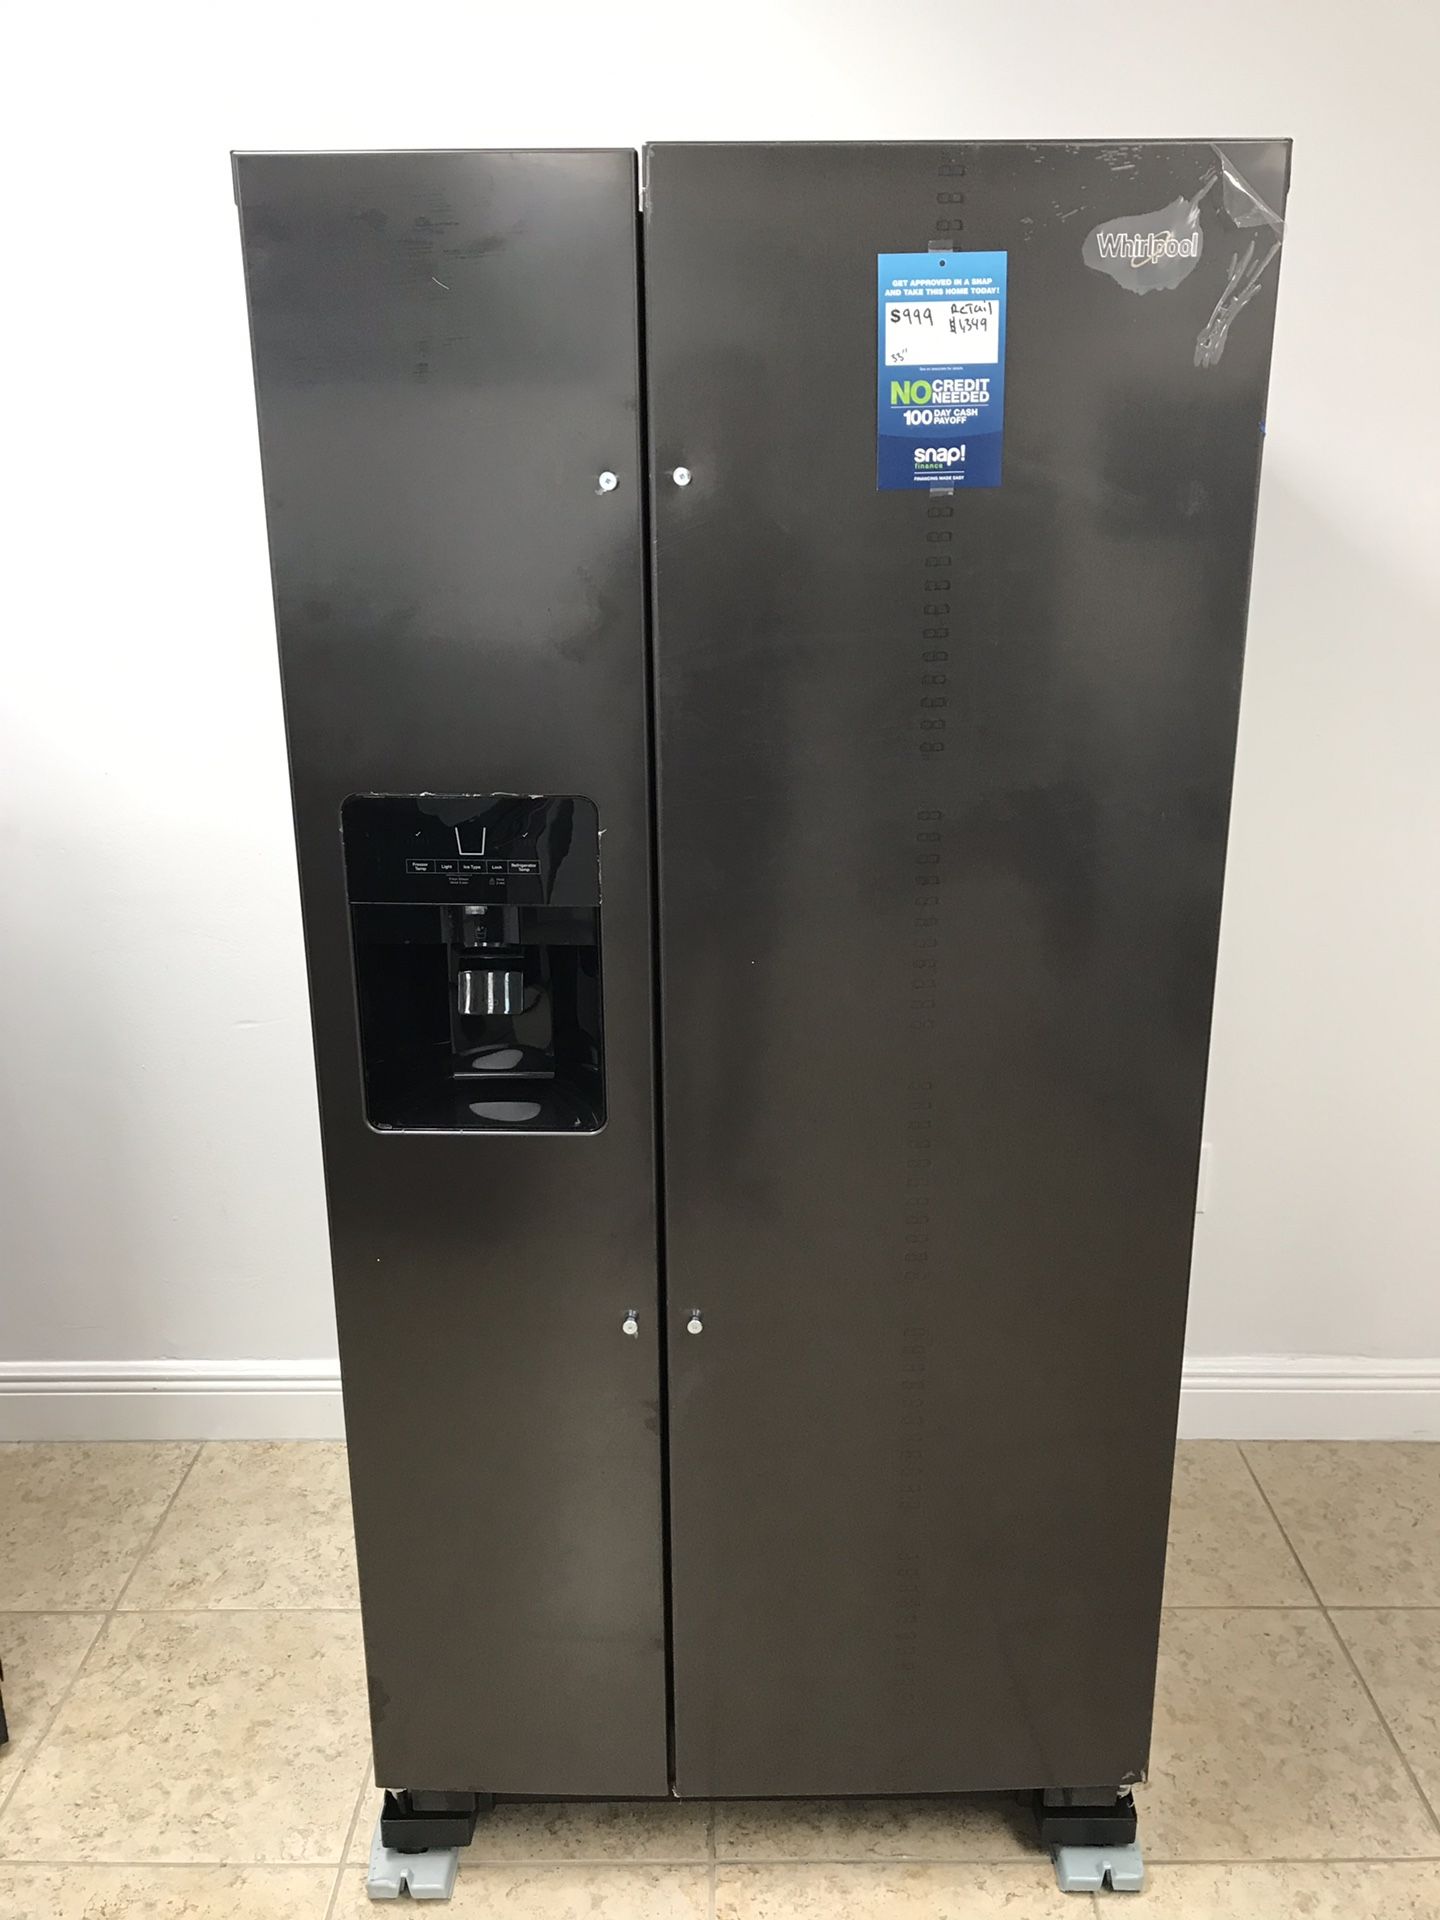 Whirlpool refrigerator 21 cu. ft. Take home for only $39 down EZ financing